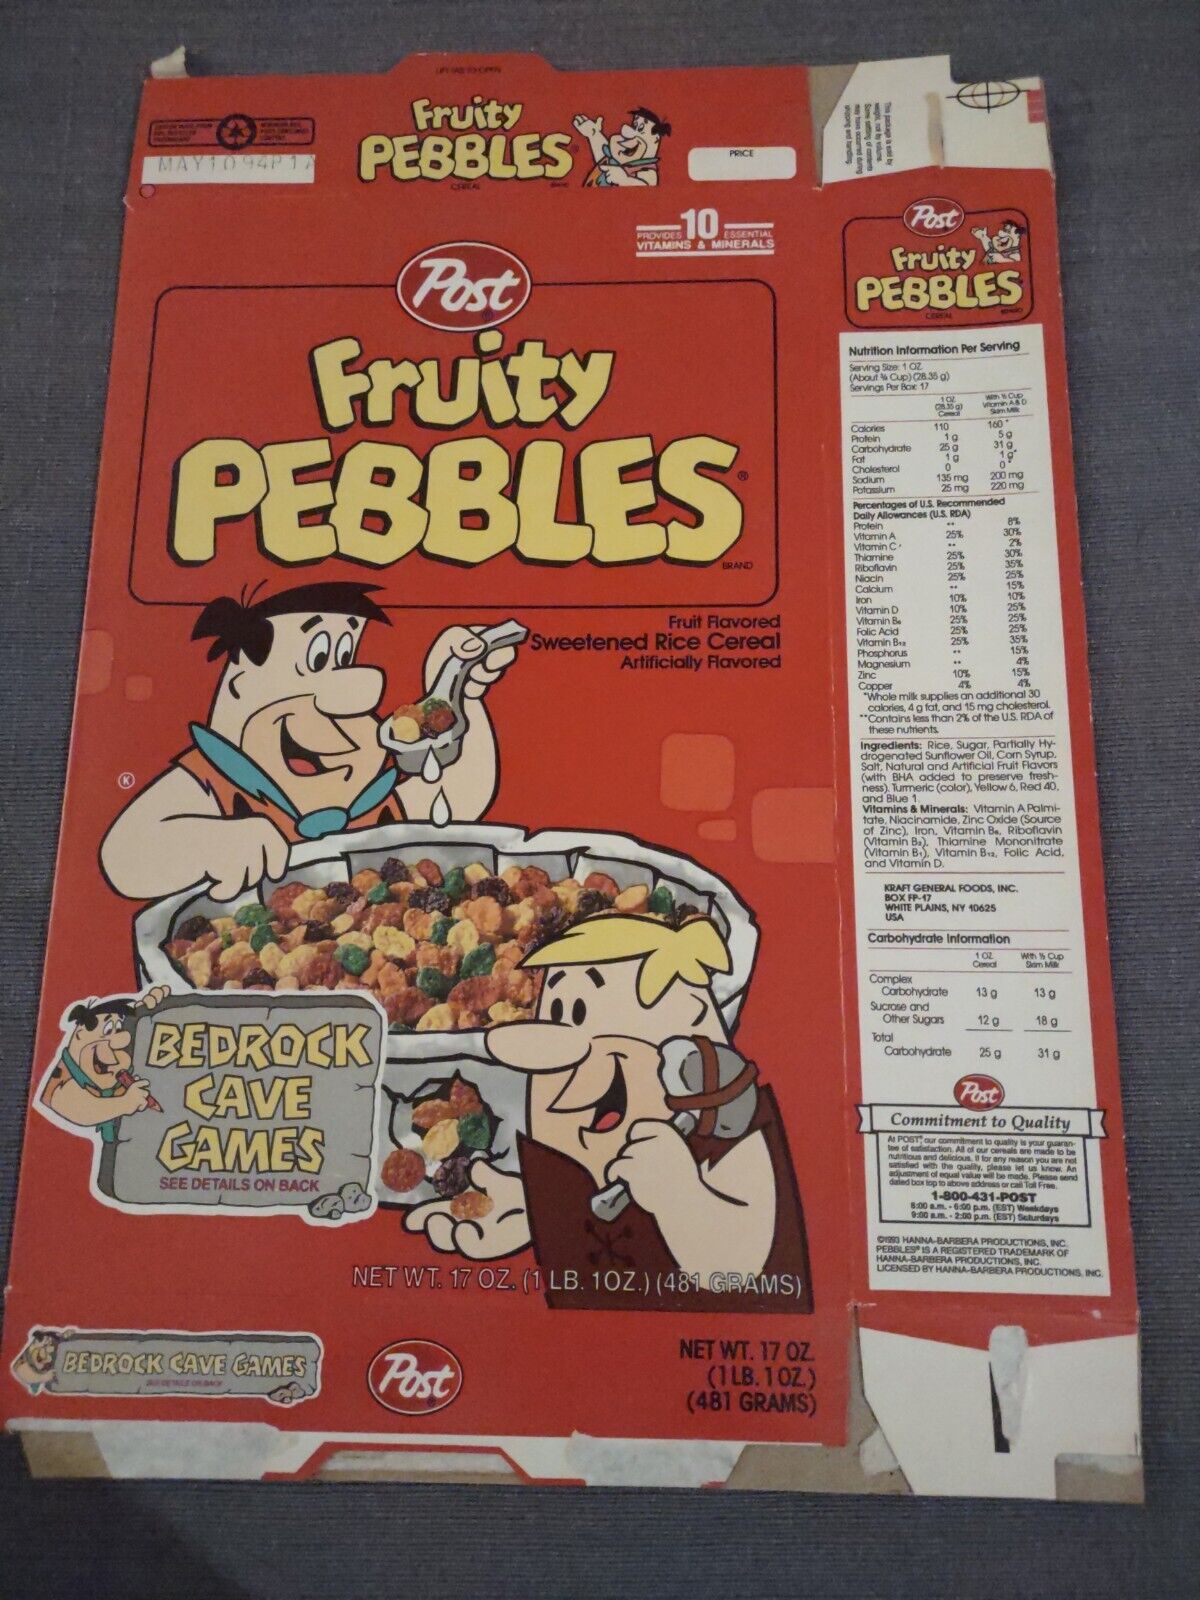 1993 POST FRUITY PEBBLES Empty CEREAL BOX Used Flat Bedrock Cave Games